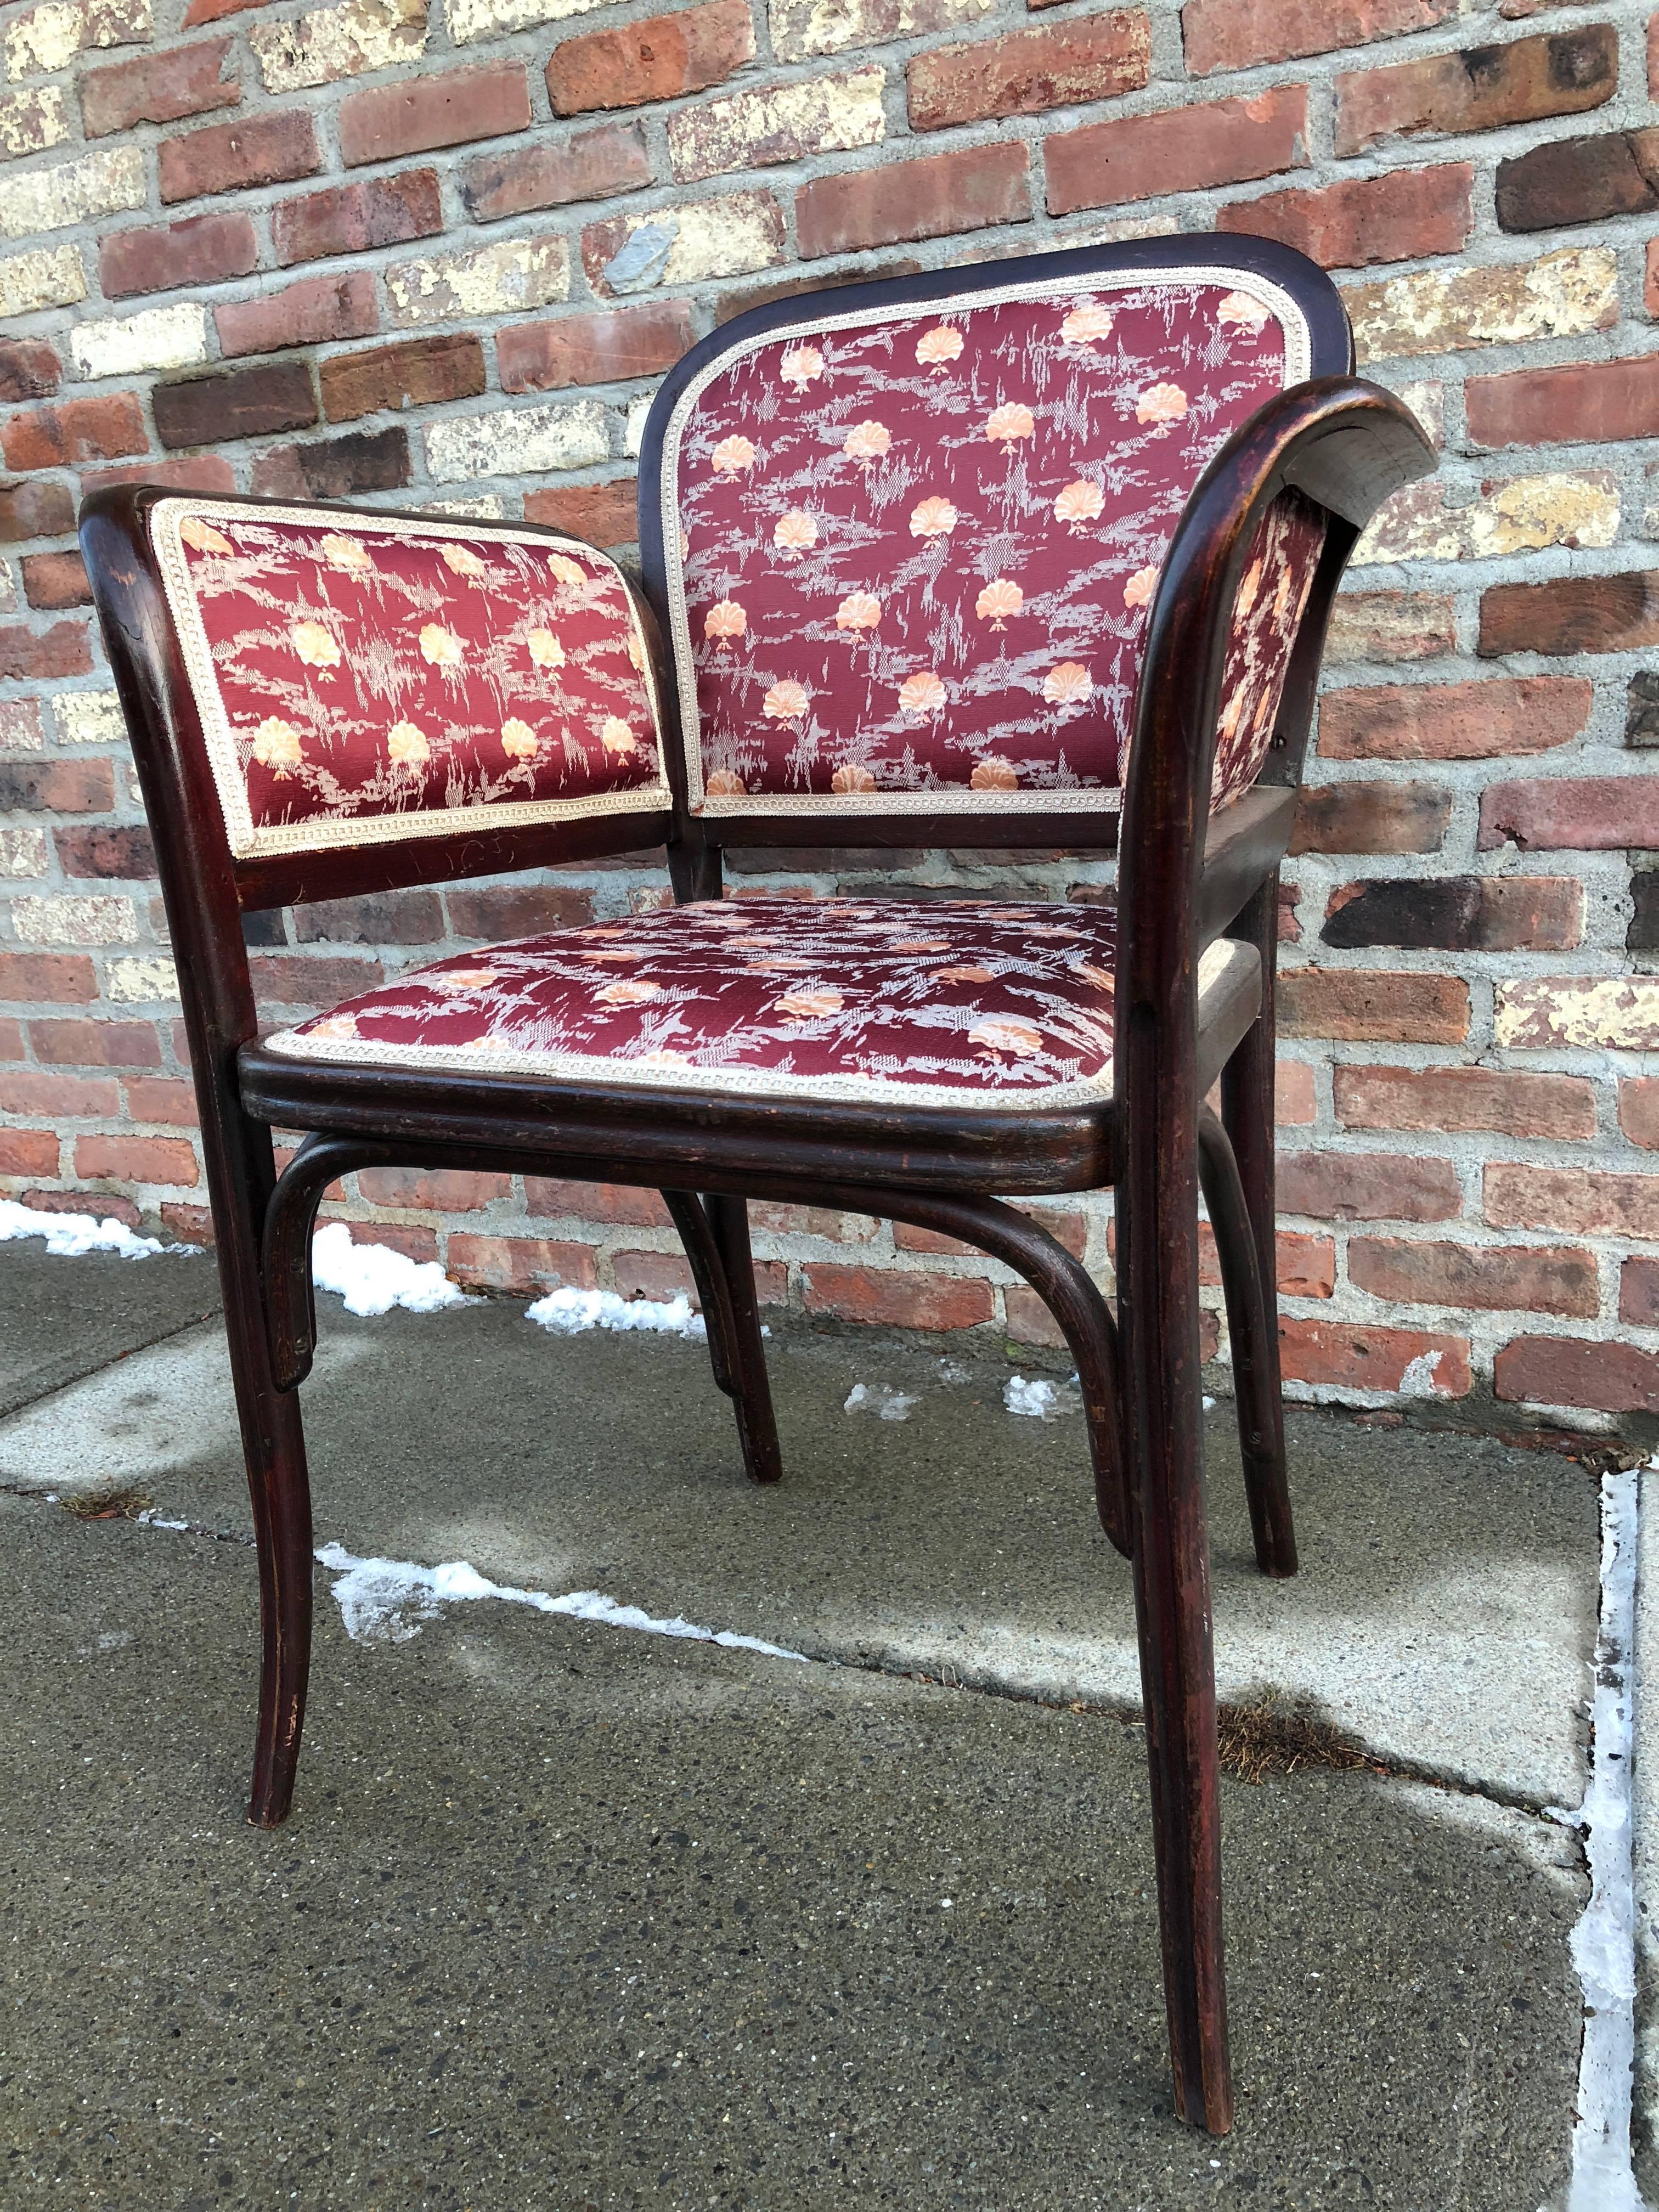 Unusual bentwood chair with flaring side arms, upholstered in Secessionist-style fabric. Thonet stamp to interior frame.